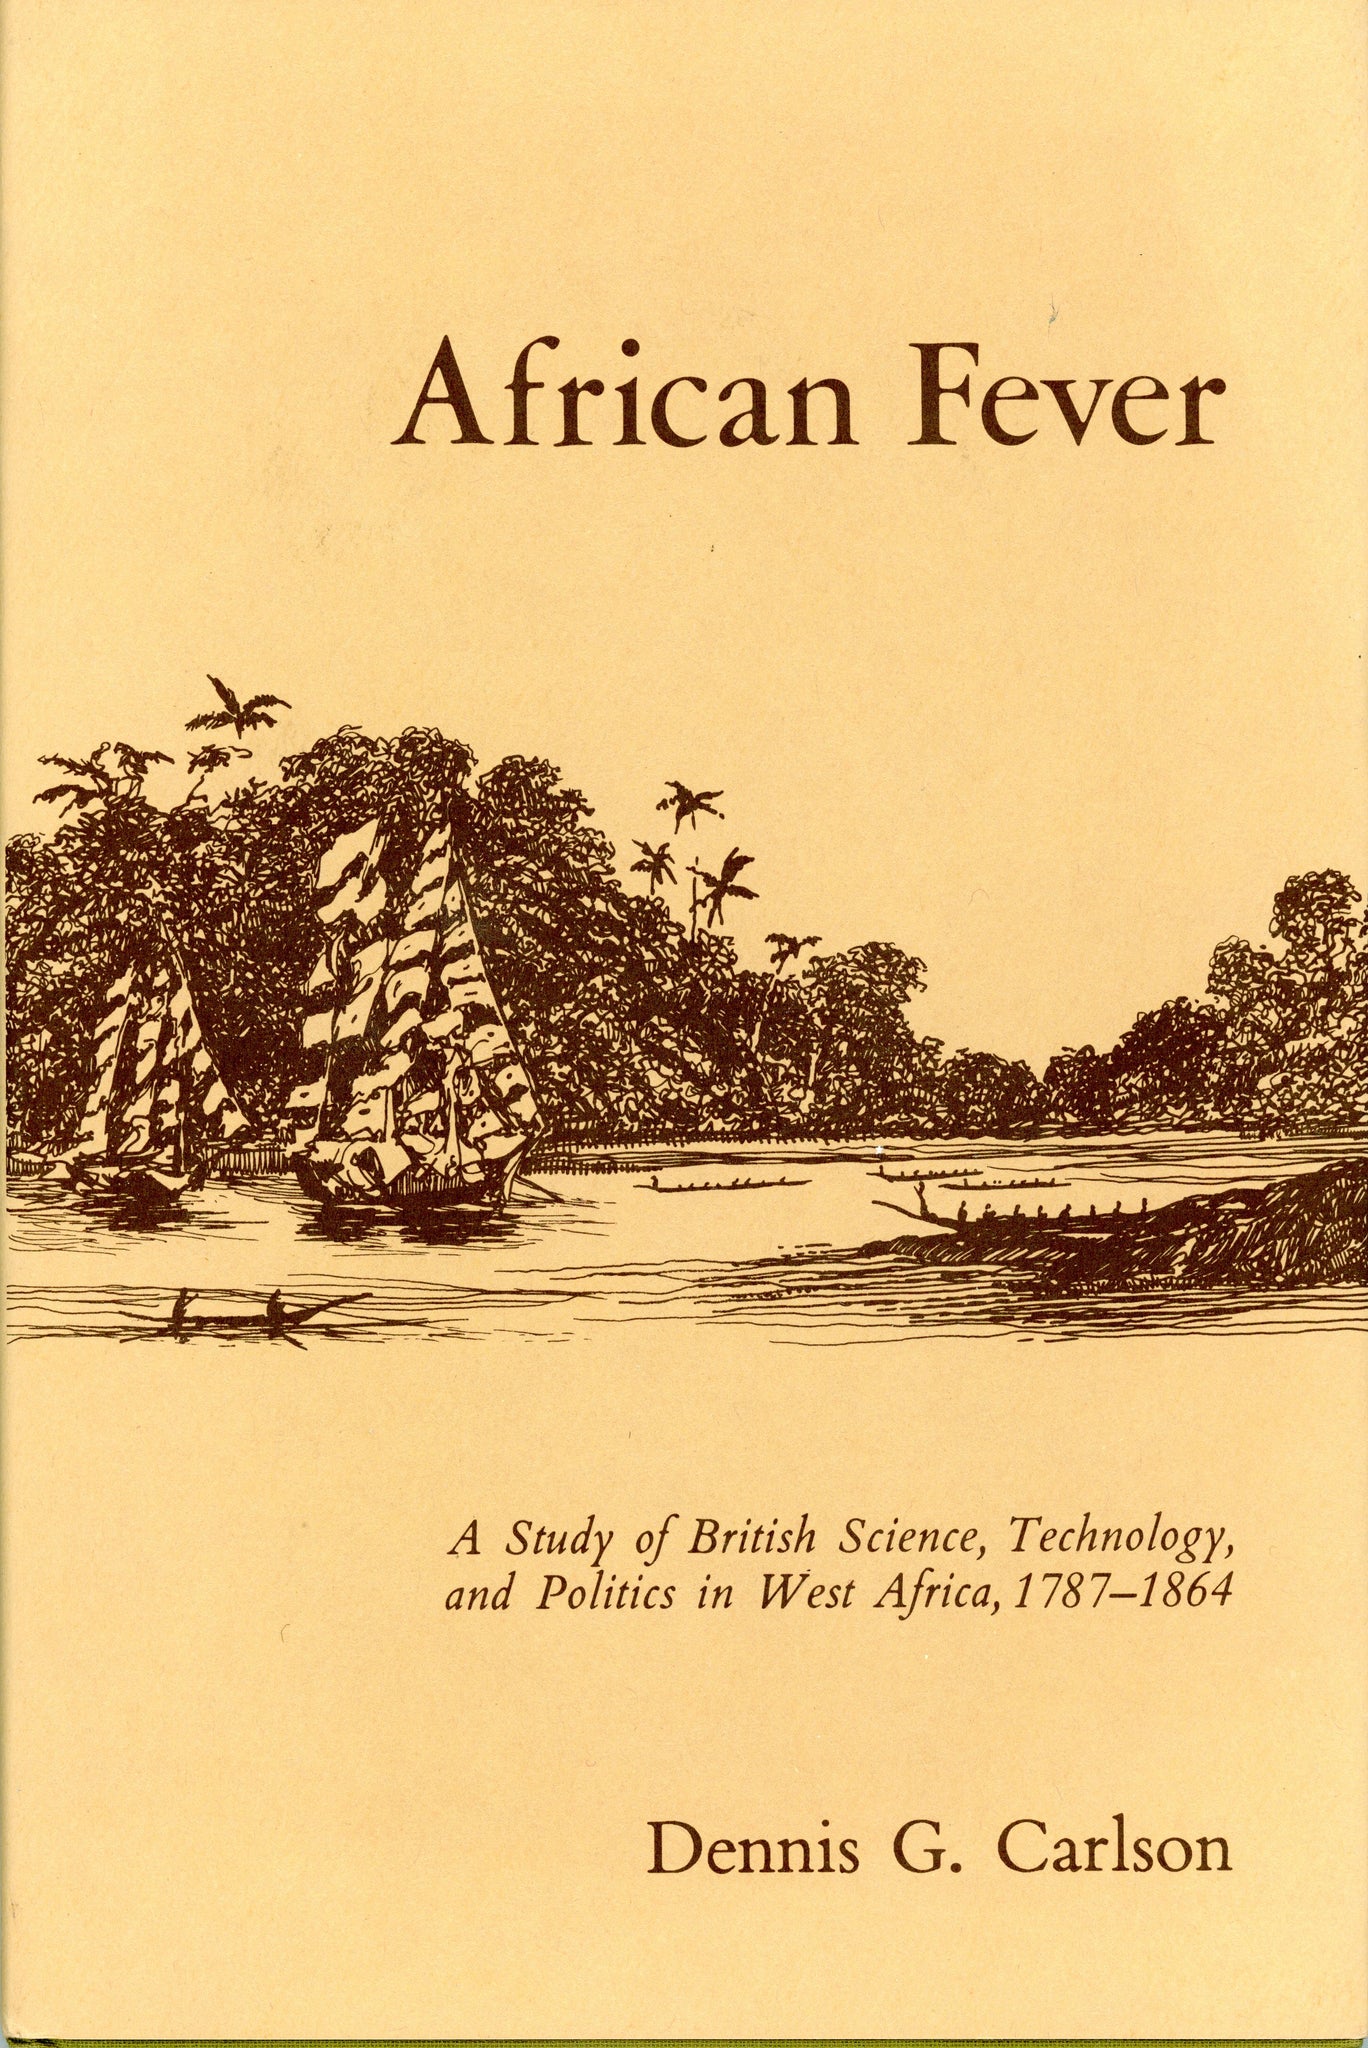 African Fever: A Study of British Science, Technology, and Politics in West Africa, 1787–1864